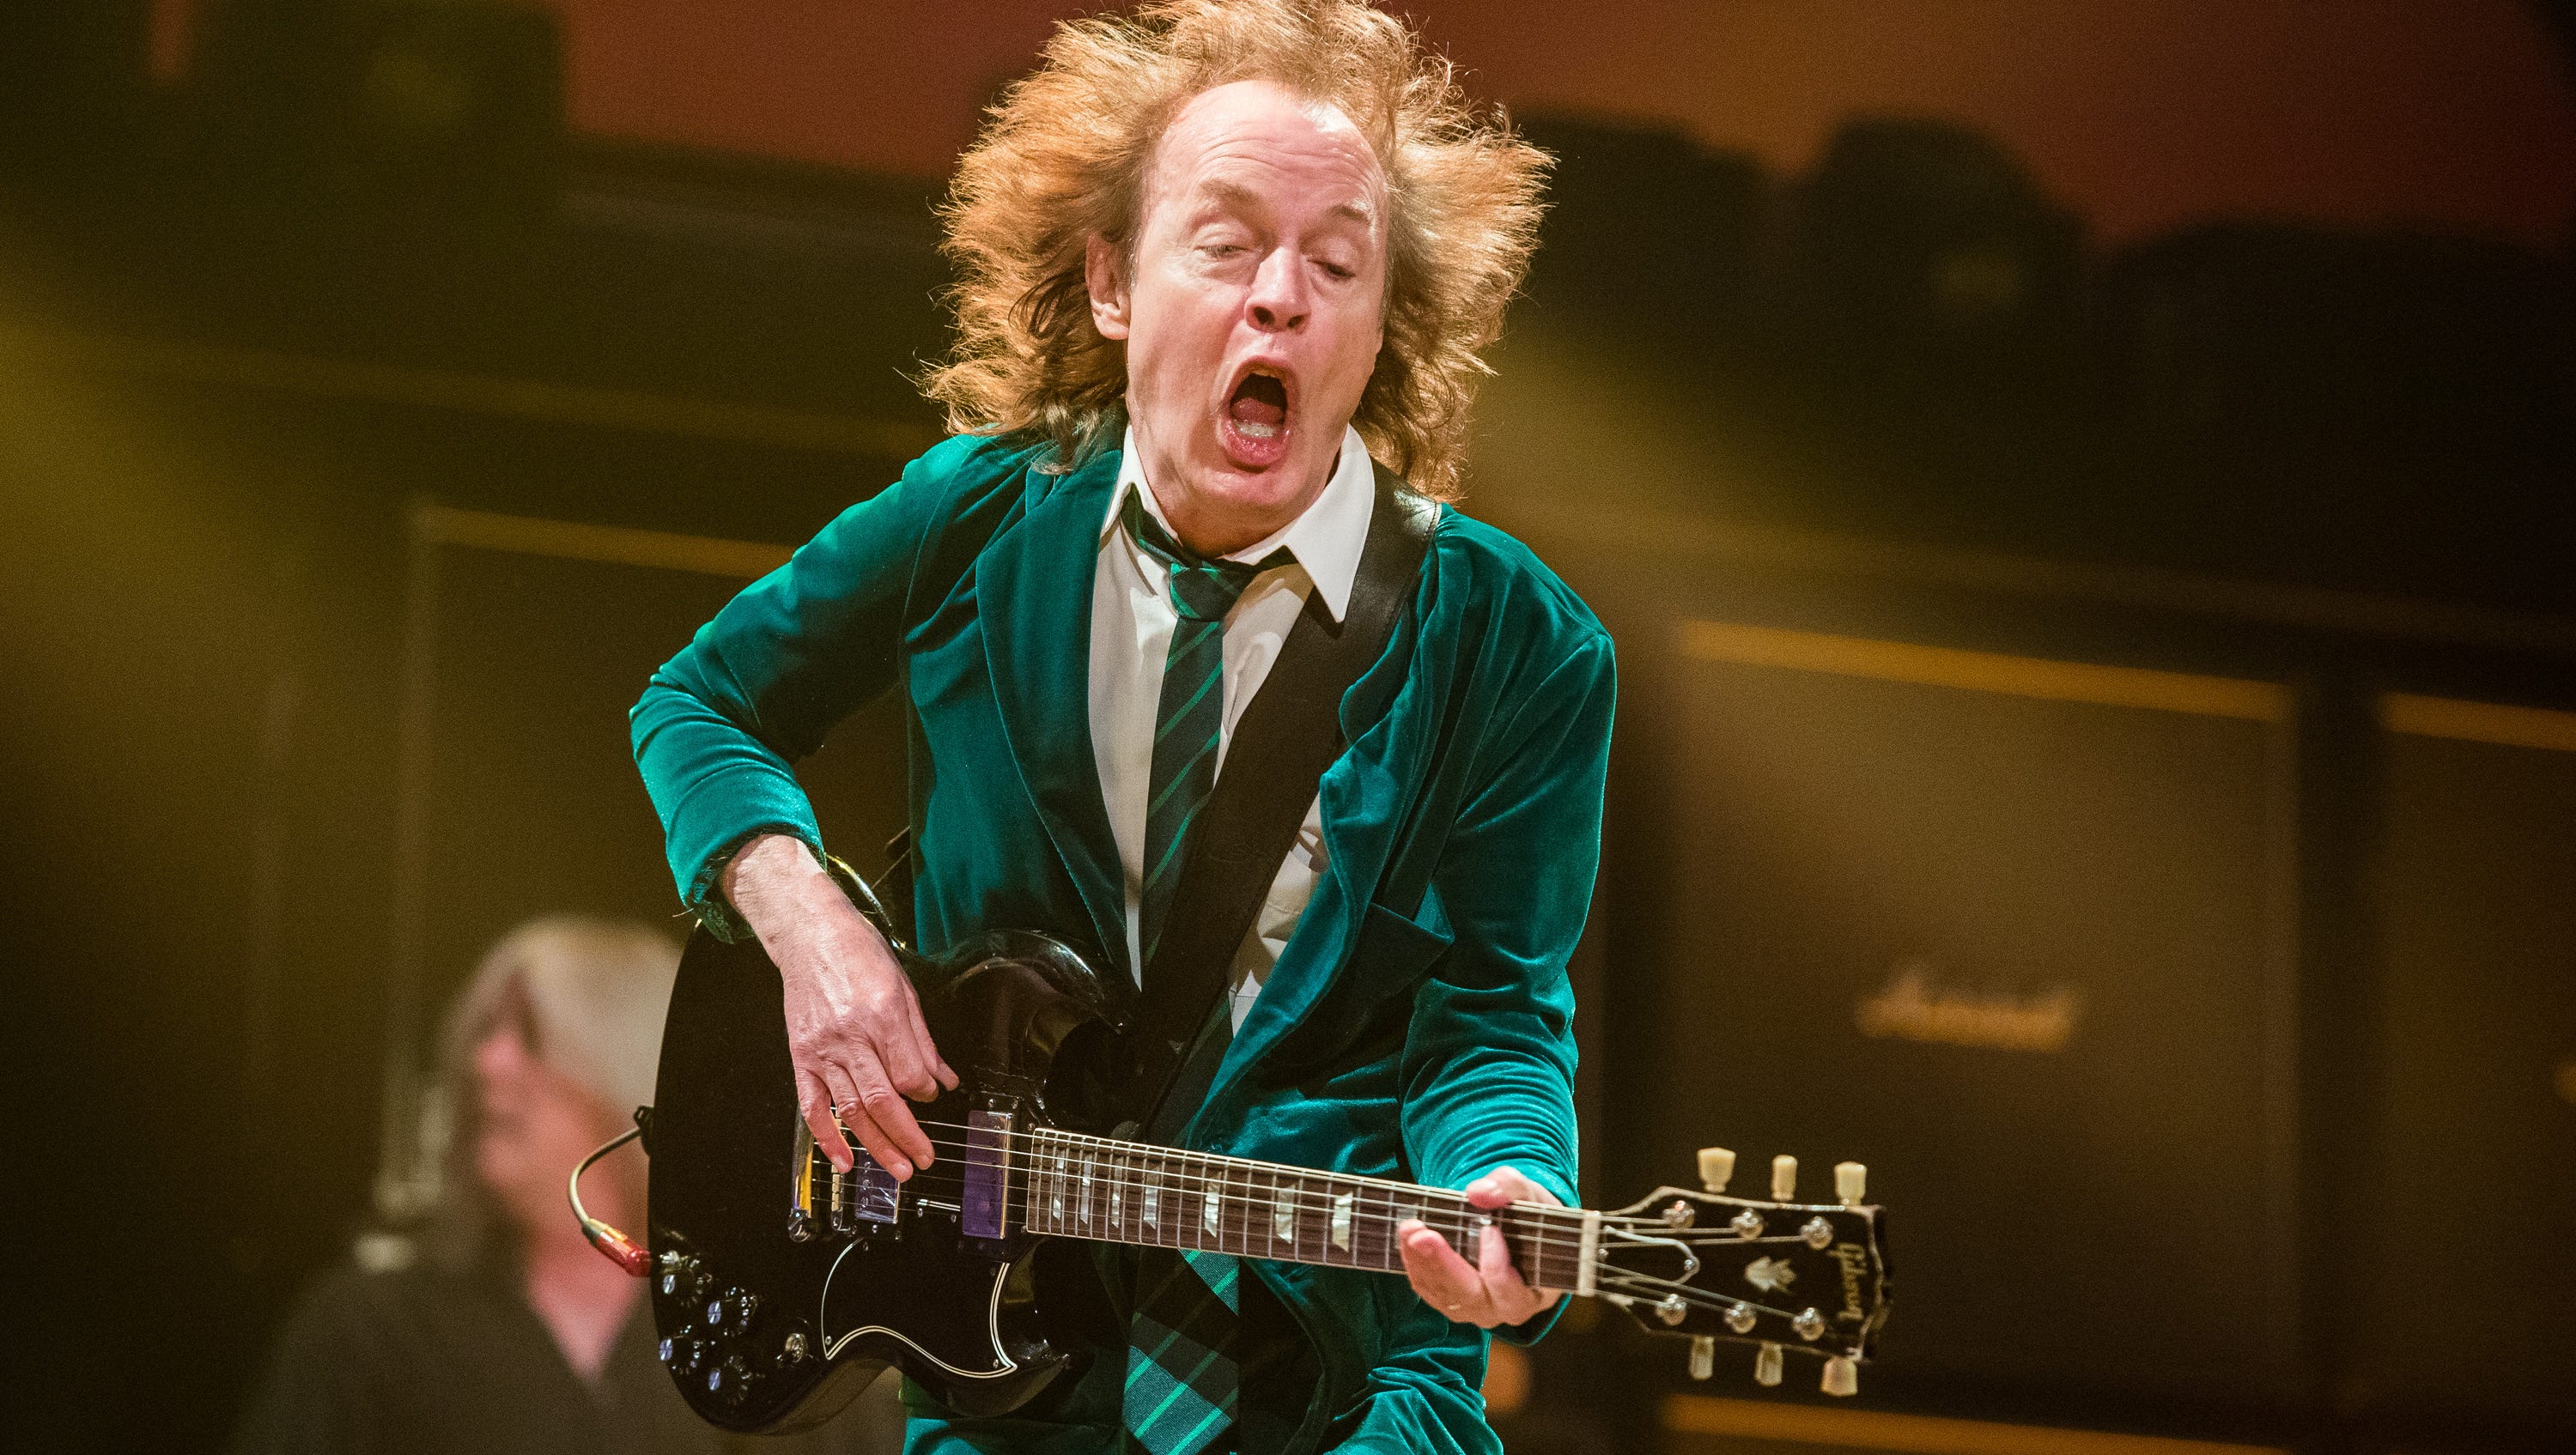 AC/DC's Angus Young  performs Friday night during the “Rock or Bust” World Tour at The Palace Of Auburn Hills.